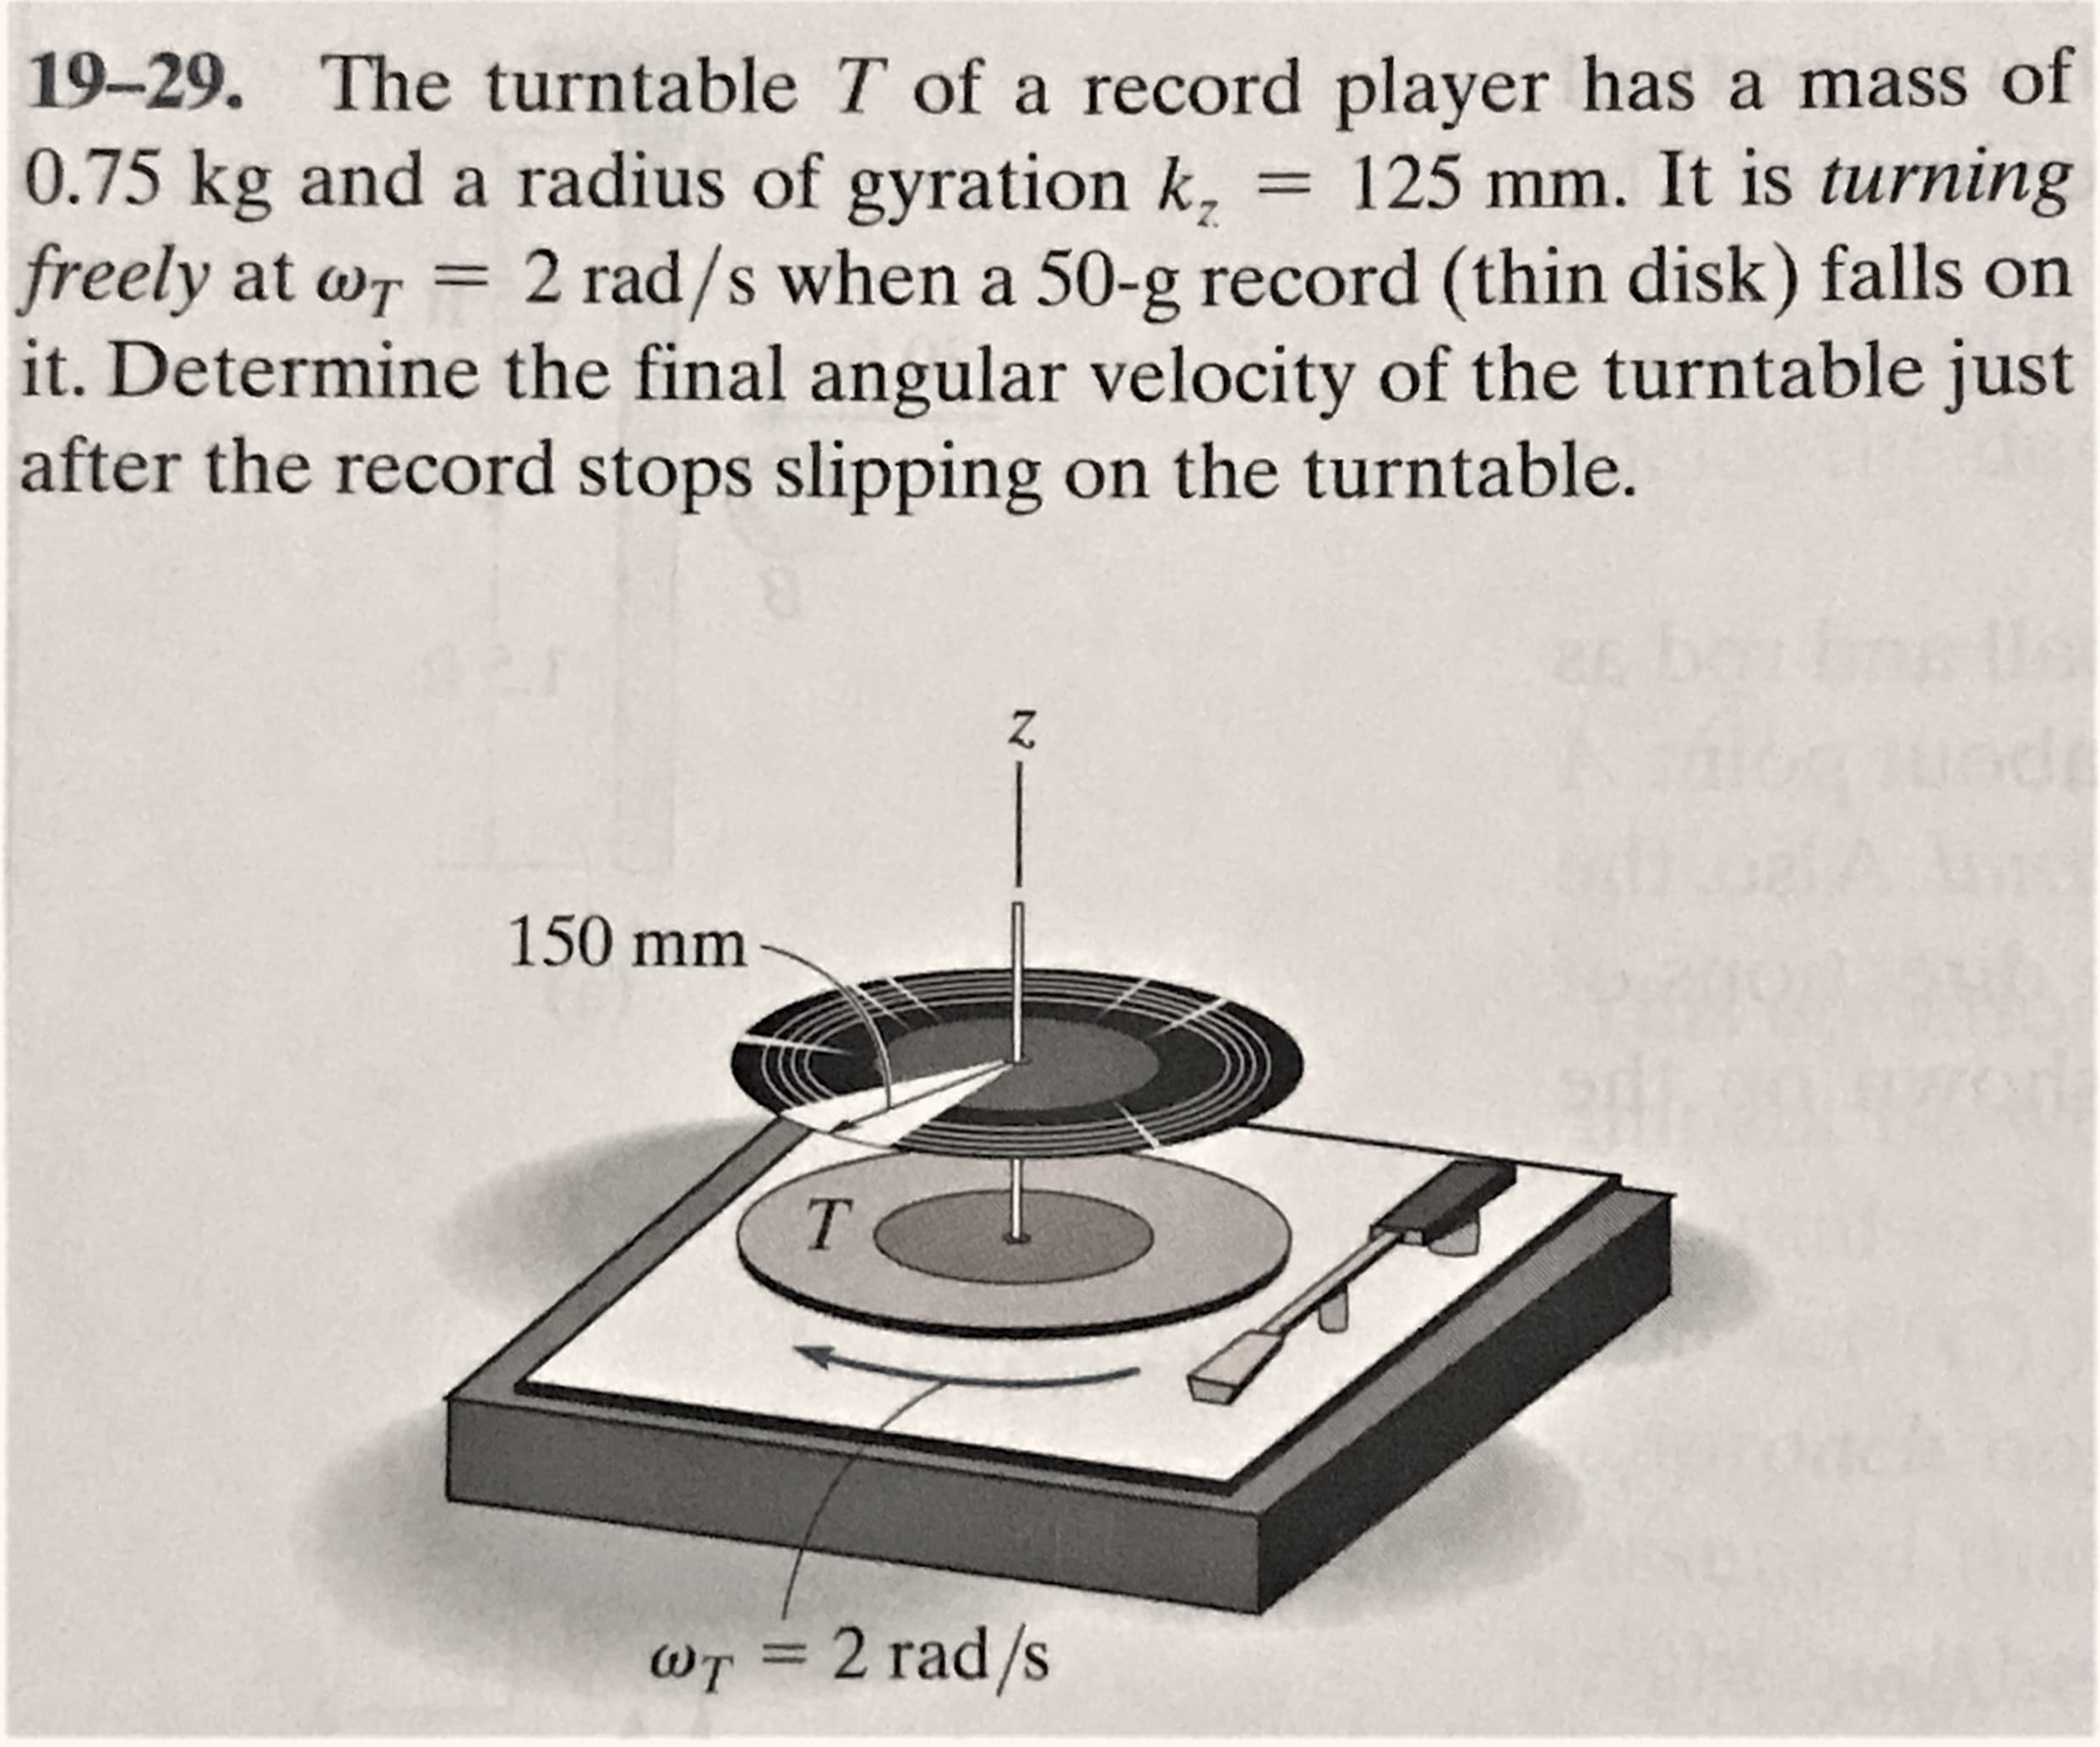 19-29. The turntable T of a record player has a mass of
0.75 kg and a radius of gyration k, = 125 mm. It is turning
freely at wr = 2 rad/s when a 50-g record (thin disk) falls on
it. Determine the final angular velocity of the turntable just
after the record stops slipping on the turntable.
150 mm
wT = 2 rad/s
%3D
